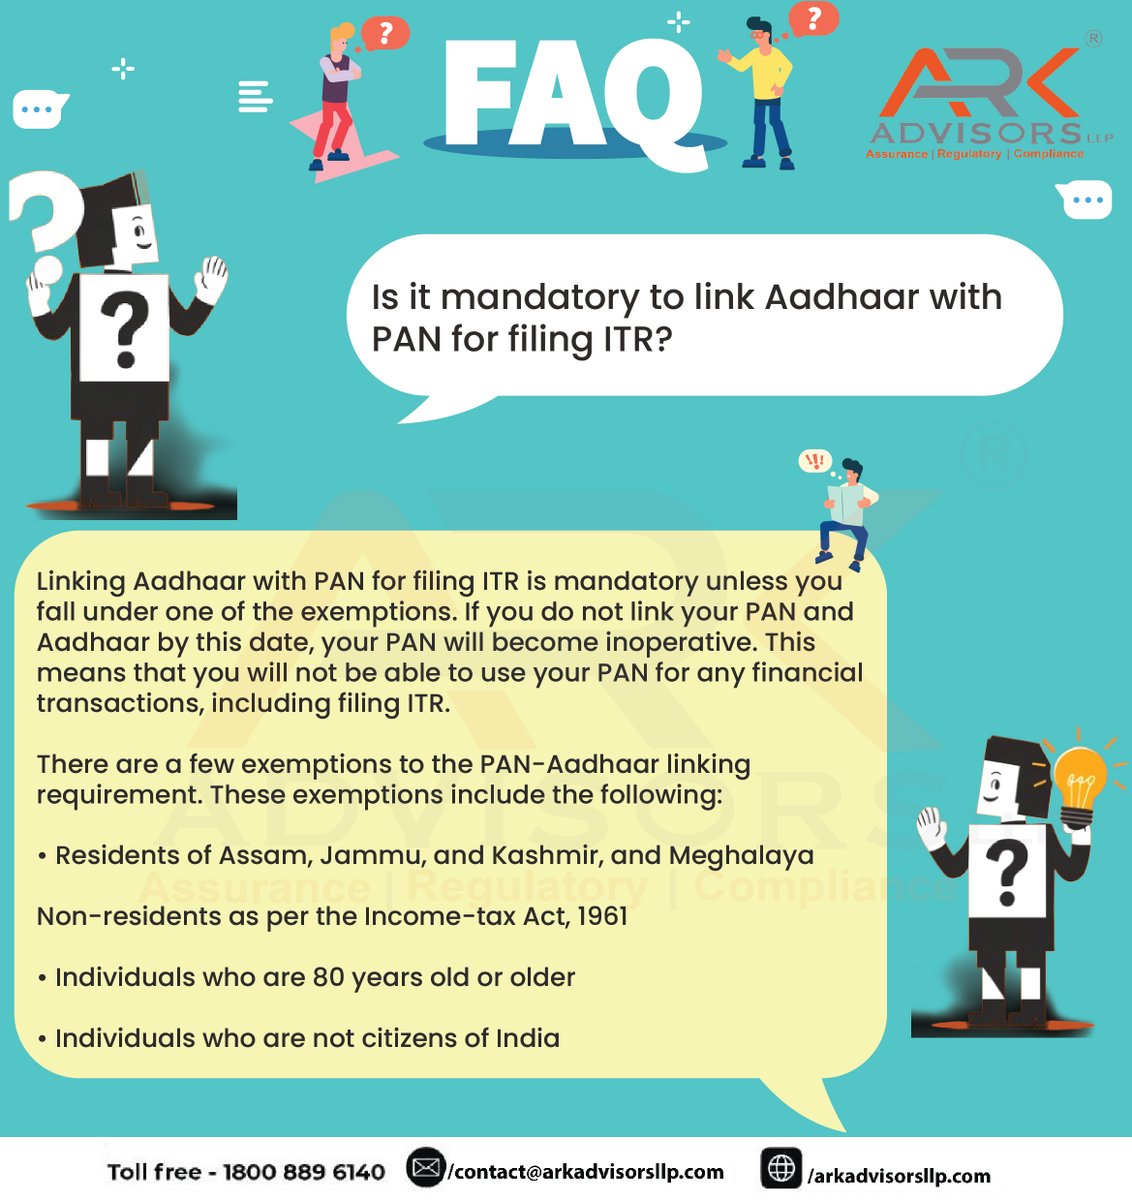 Reminder: Don't forget to link your Aadhaar with PAN for smooth ITR filing. Exceptions apply, so check now! 💼💳 

.

.

.

.

.

.

.

#TaxFiling #IncomeTax #AadhaarLinking #PANCard #FinanceTips #DeadlineAlert #TaxFiling #IncomeTax #AadhaarLinking #PANCard #FinanceTips #Deadline